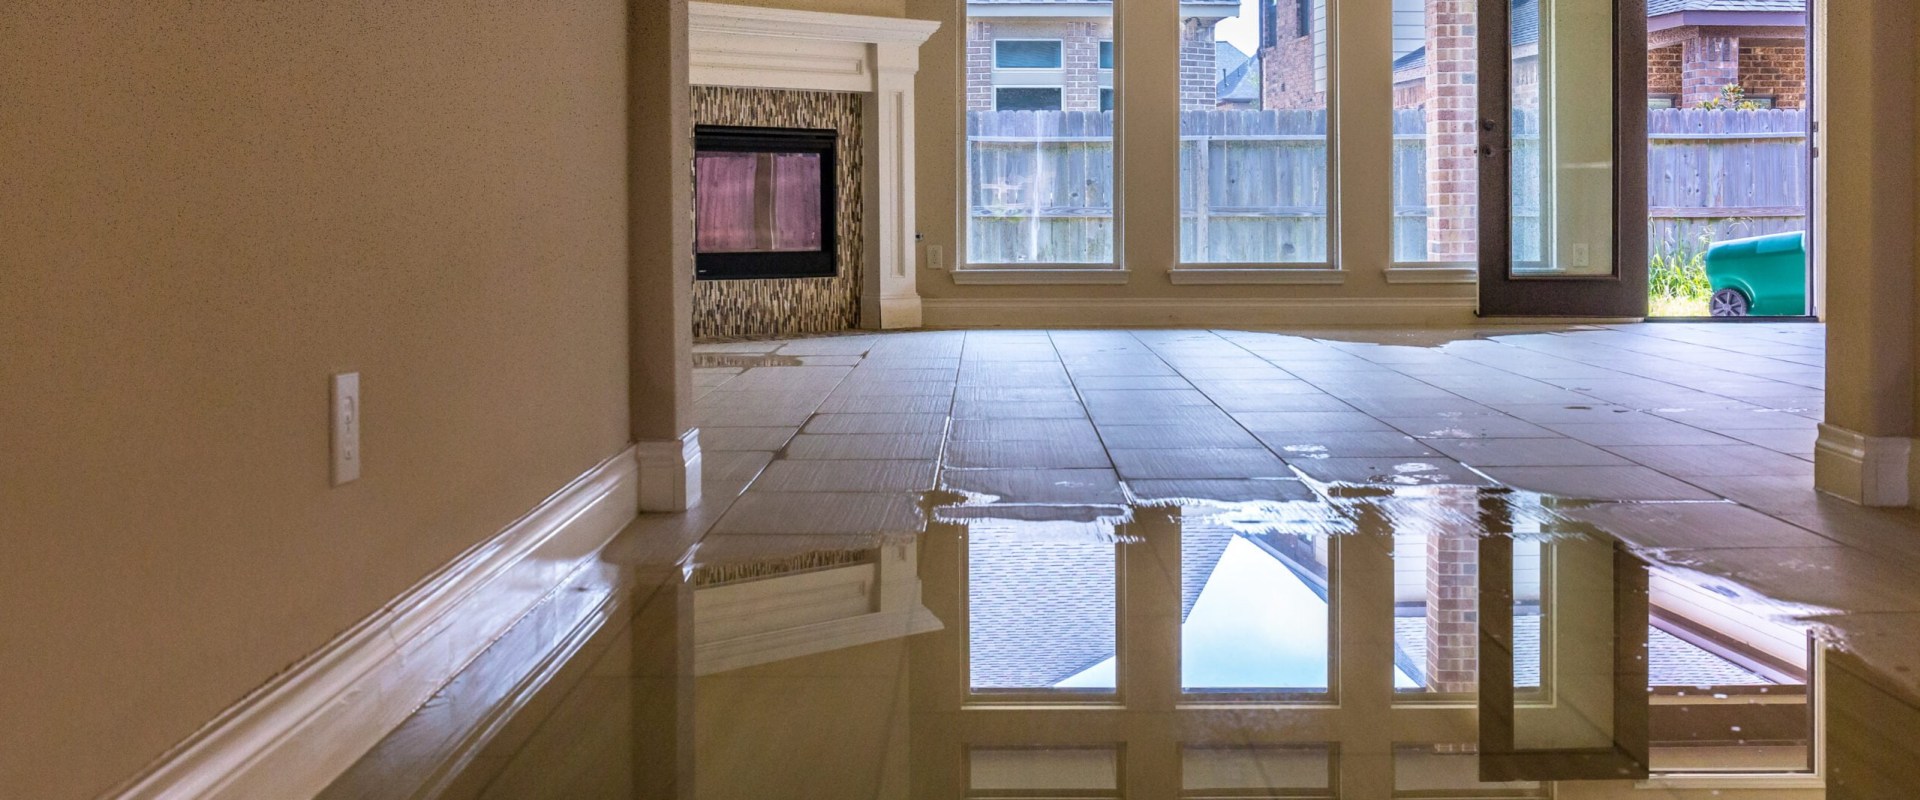 Removing standing water: A Comprehensive Guide for Water Damage Restoration